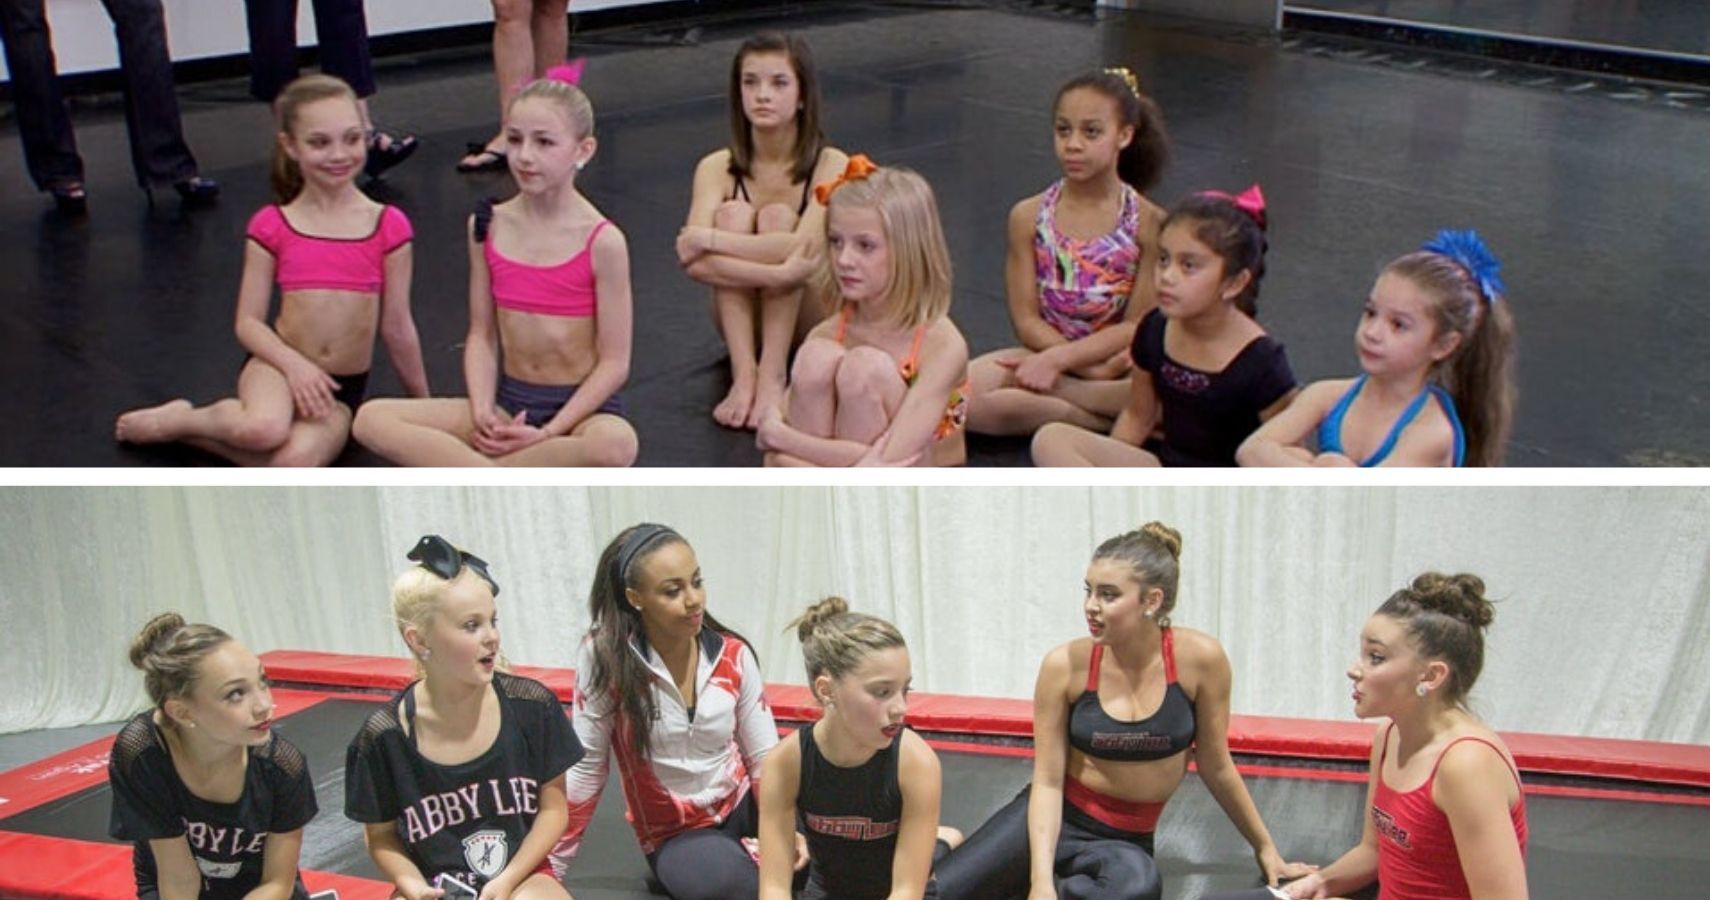 Dance Moms 10 Pics Of The Cast Comparing Season 1 To Now